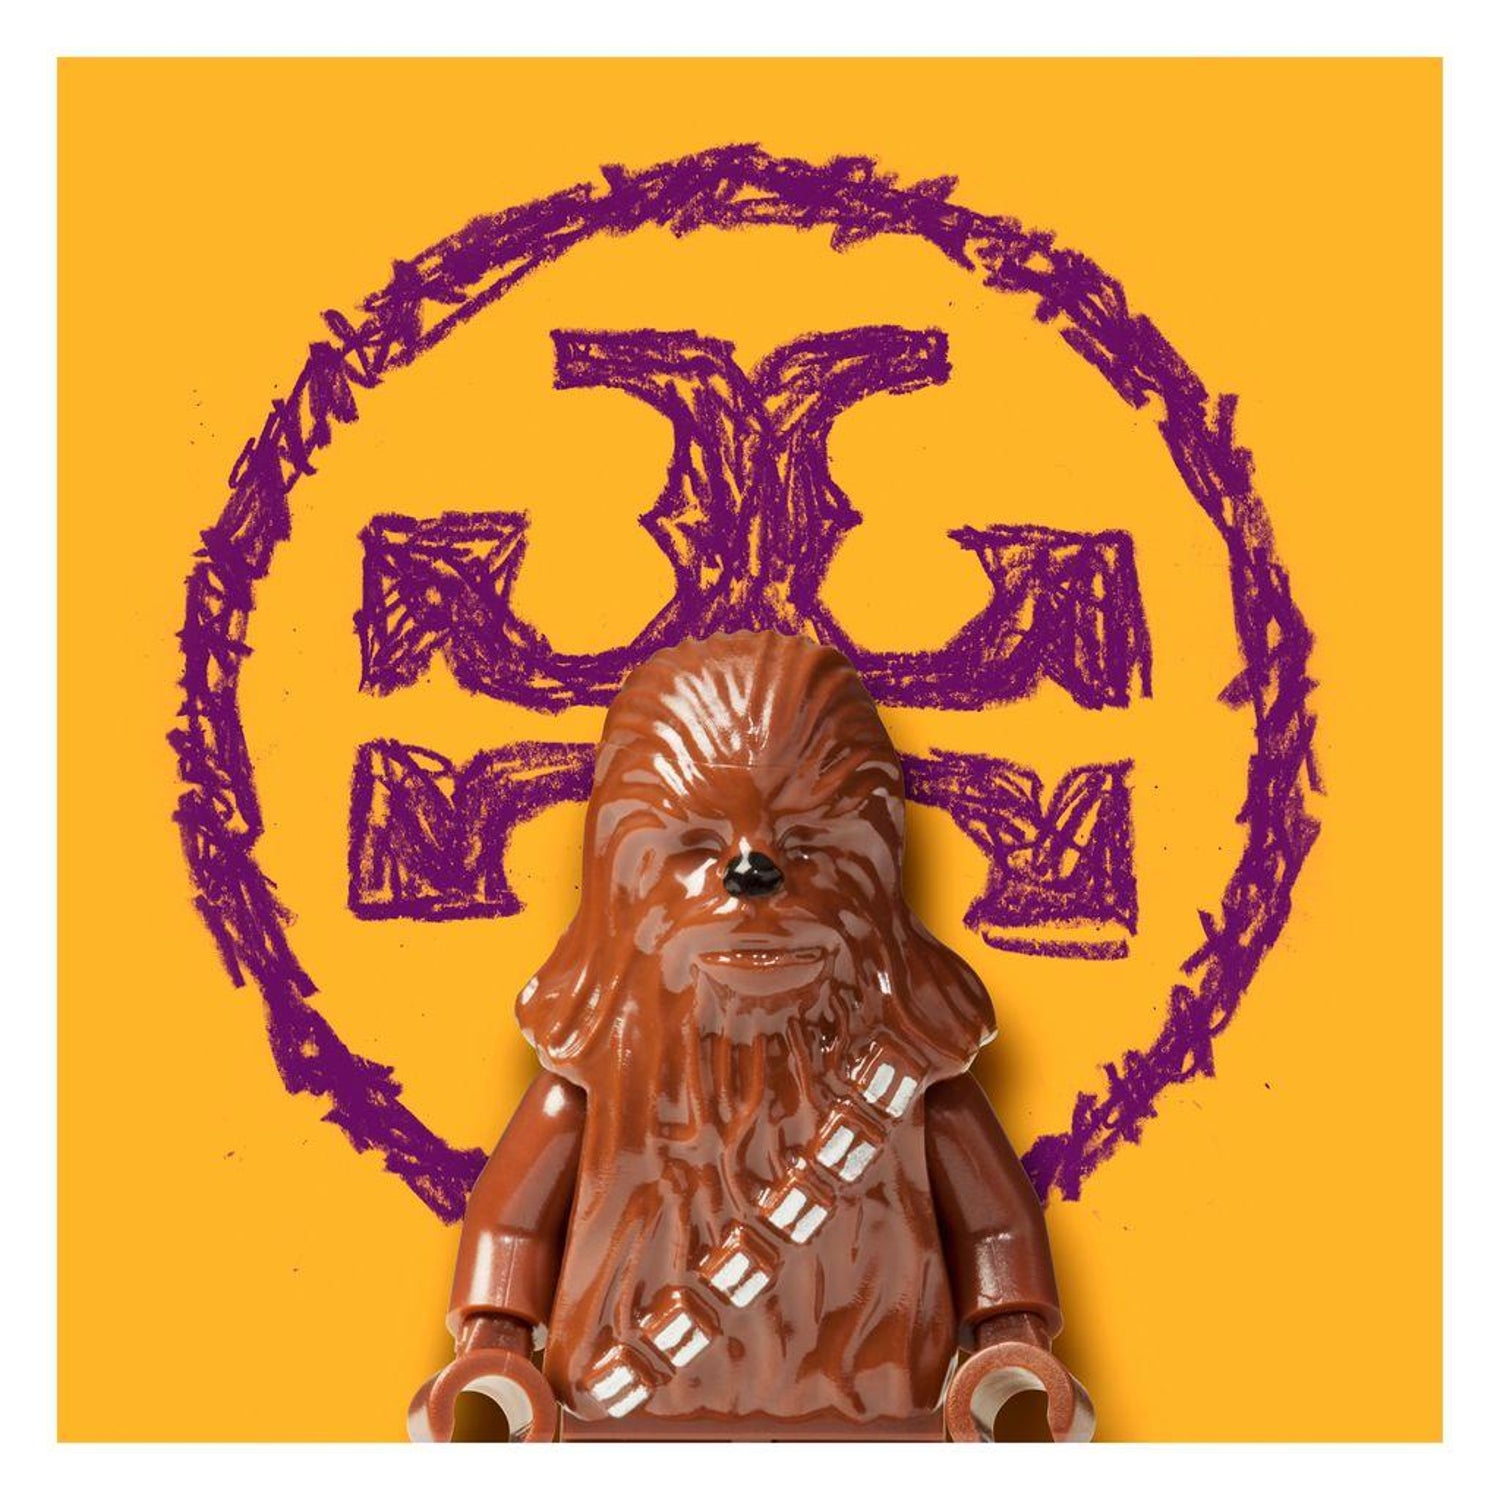 Dale May - Lego Star Wars / Mixed Media Print of Chewbacca and Tory Burch  For Sale at 1stDibs